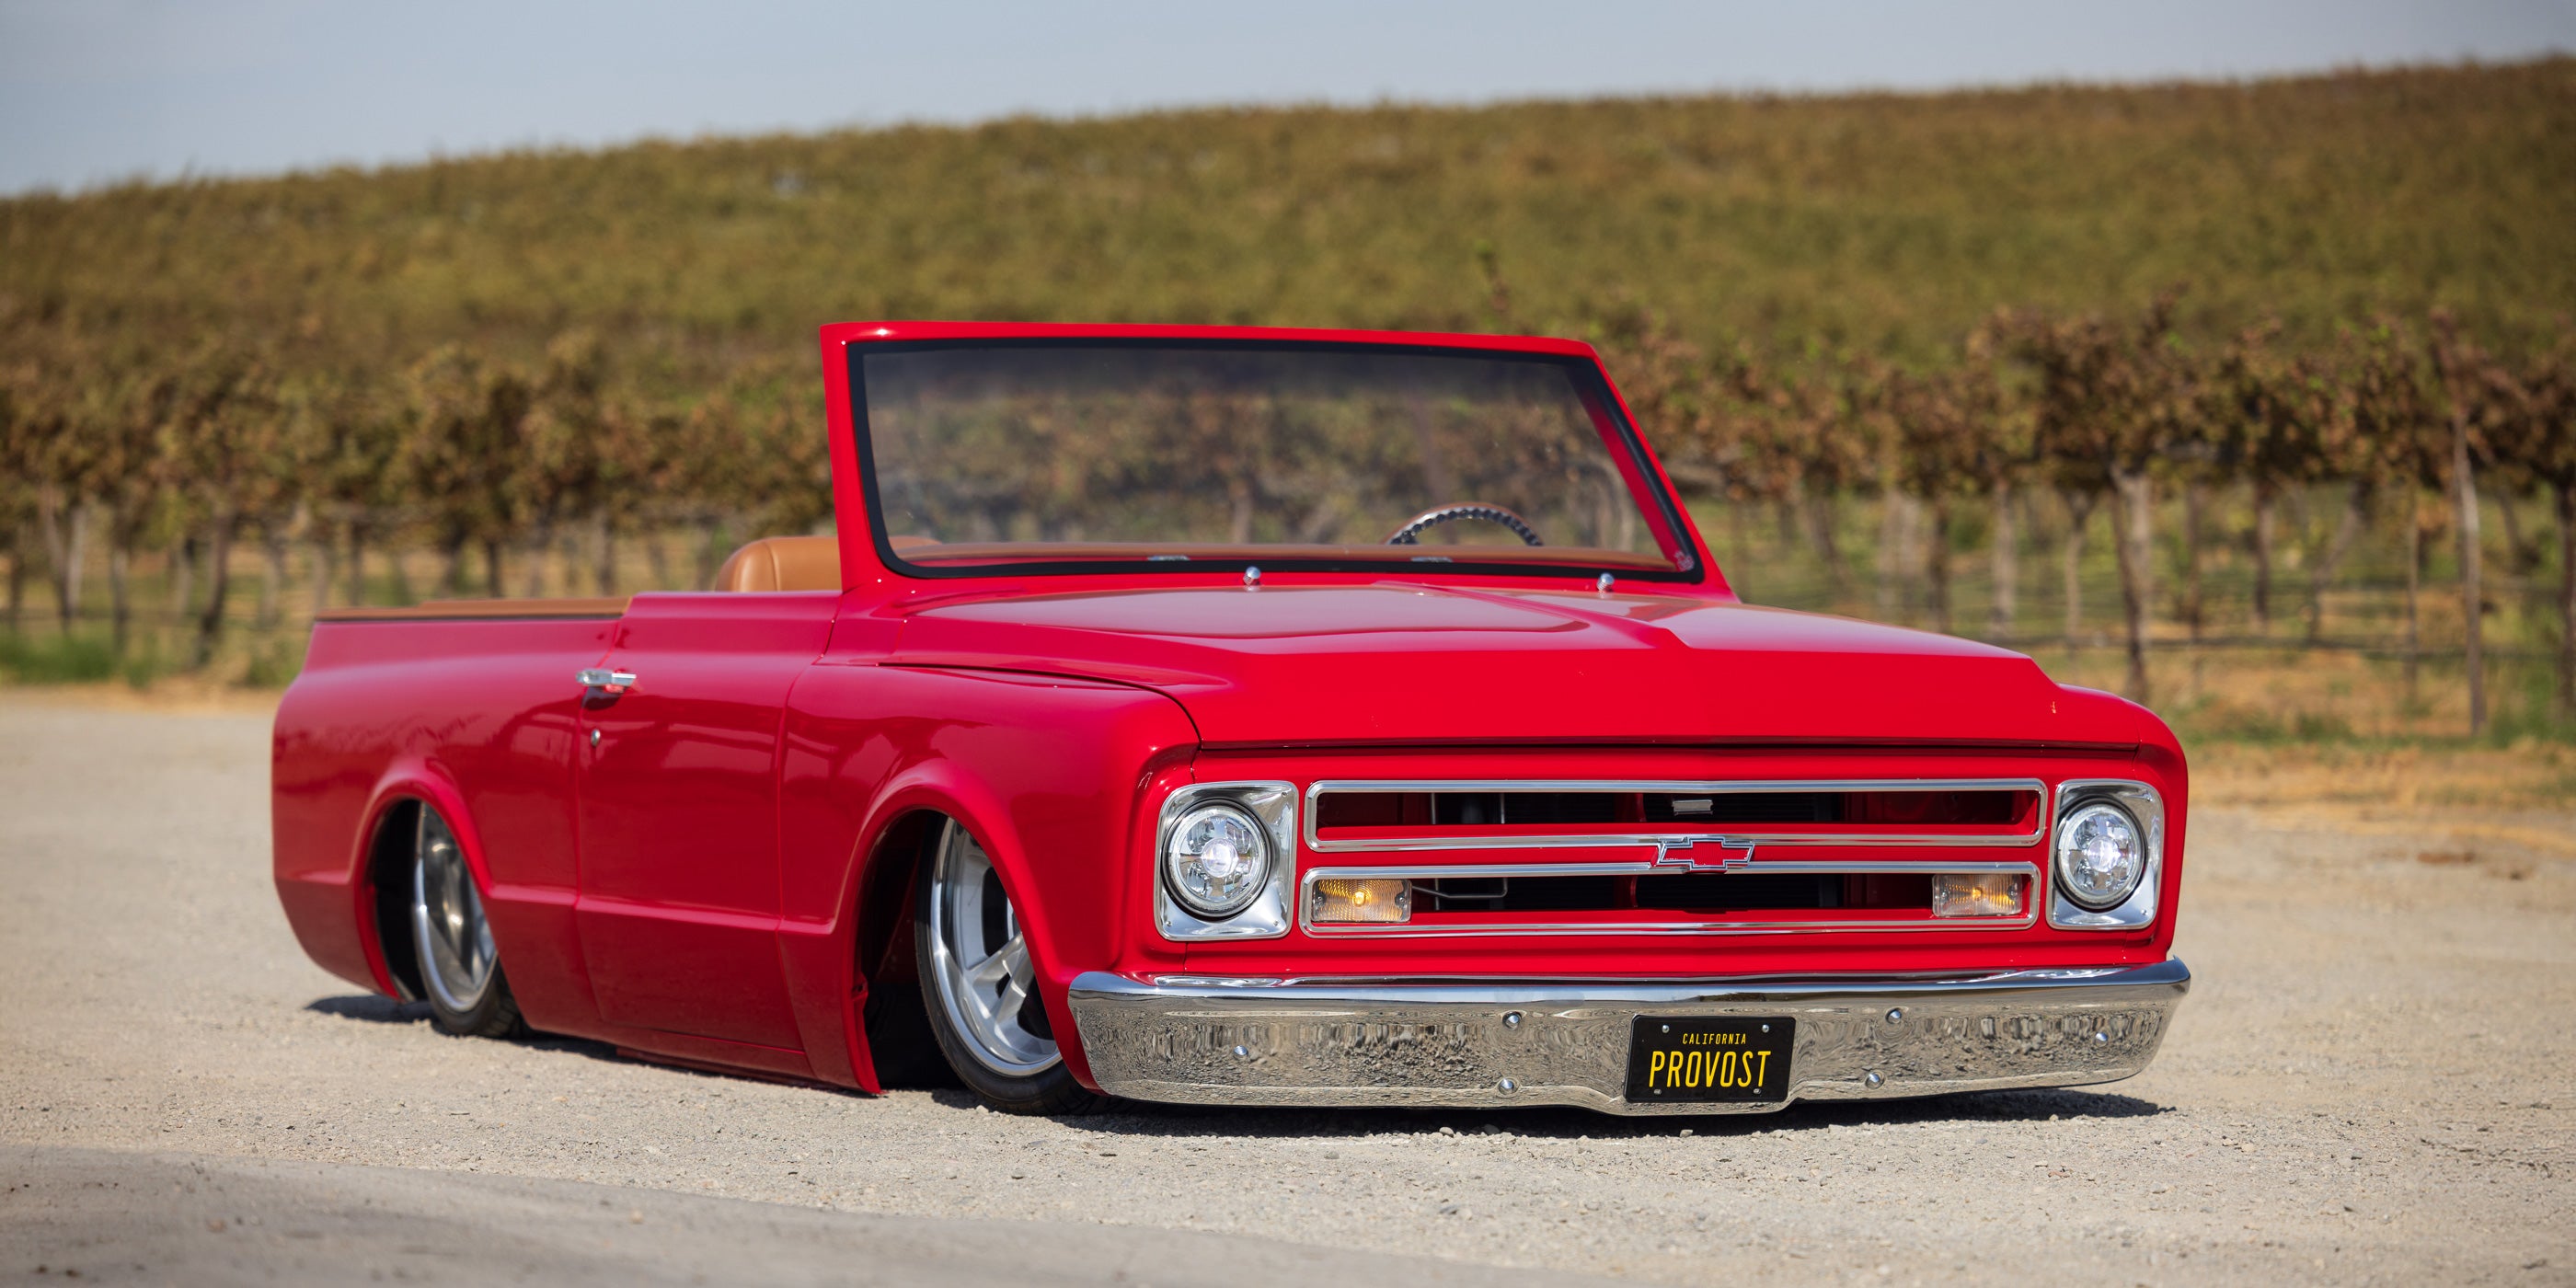 Load video: John Oro AKA “El Presidente”, tells his story about how he came about the C10 Club and his beloved 1971 Chevy K5 Blazer which he named, “Prom Queen”. The gorgeous red truck was on display in our booth at SEMA 2021.